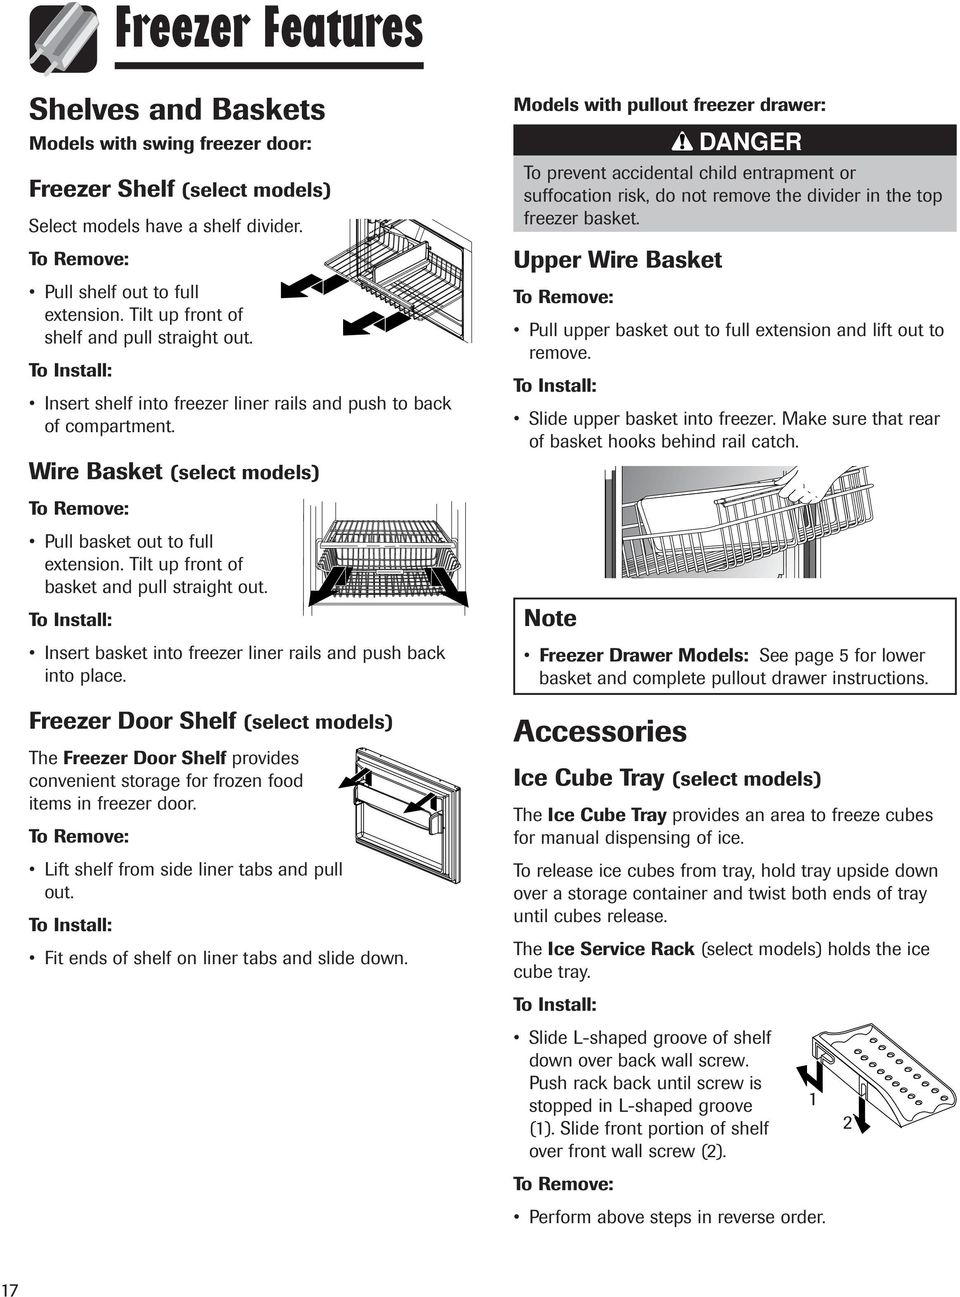 Wire Basket (select models) Models with pullout freezer drawer: Upper Wire Basket DANGER To prevent accidental child entrapment or suffocation risk, do not remove the divider in the top freezer